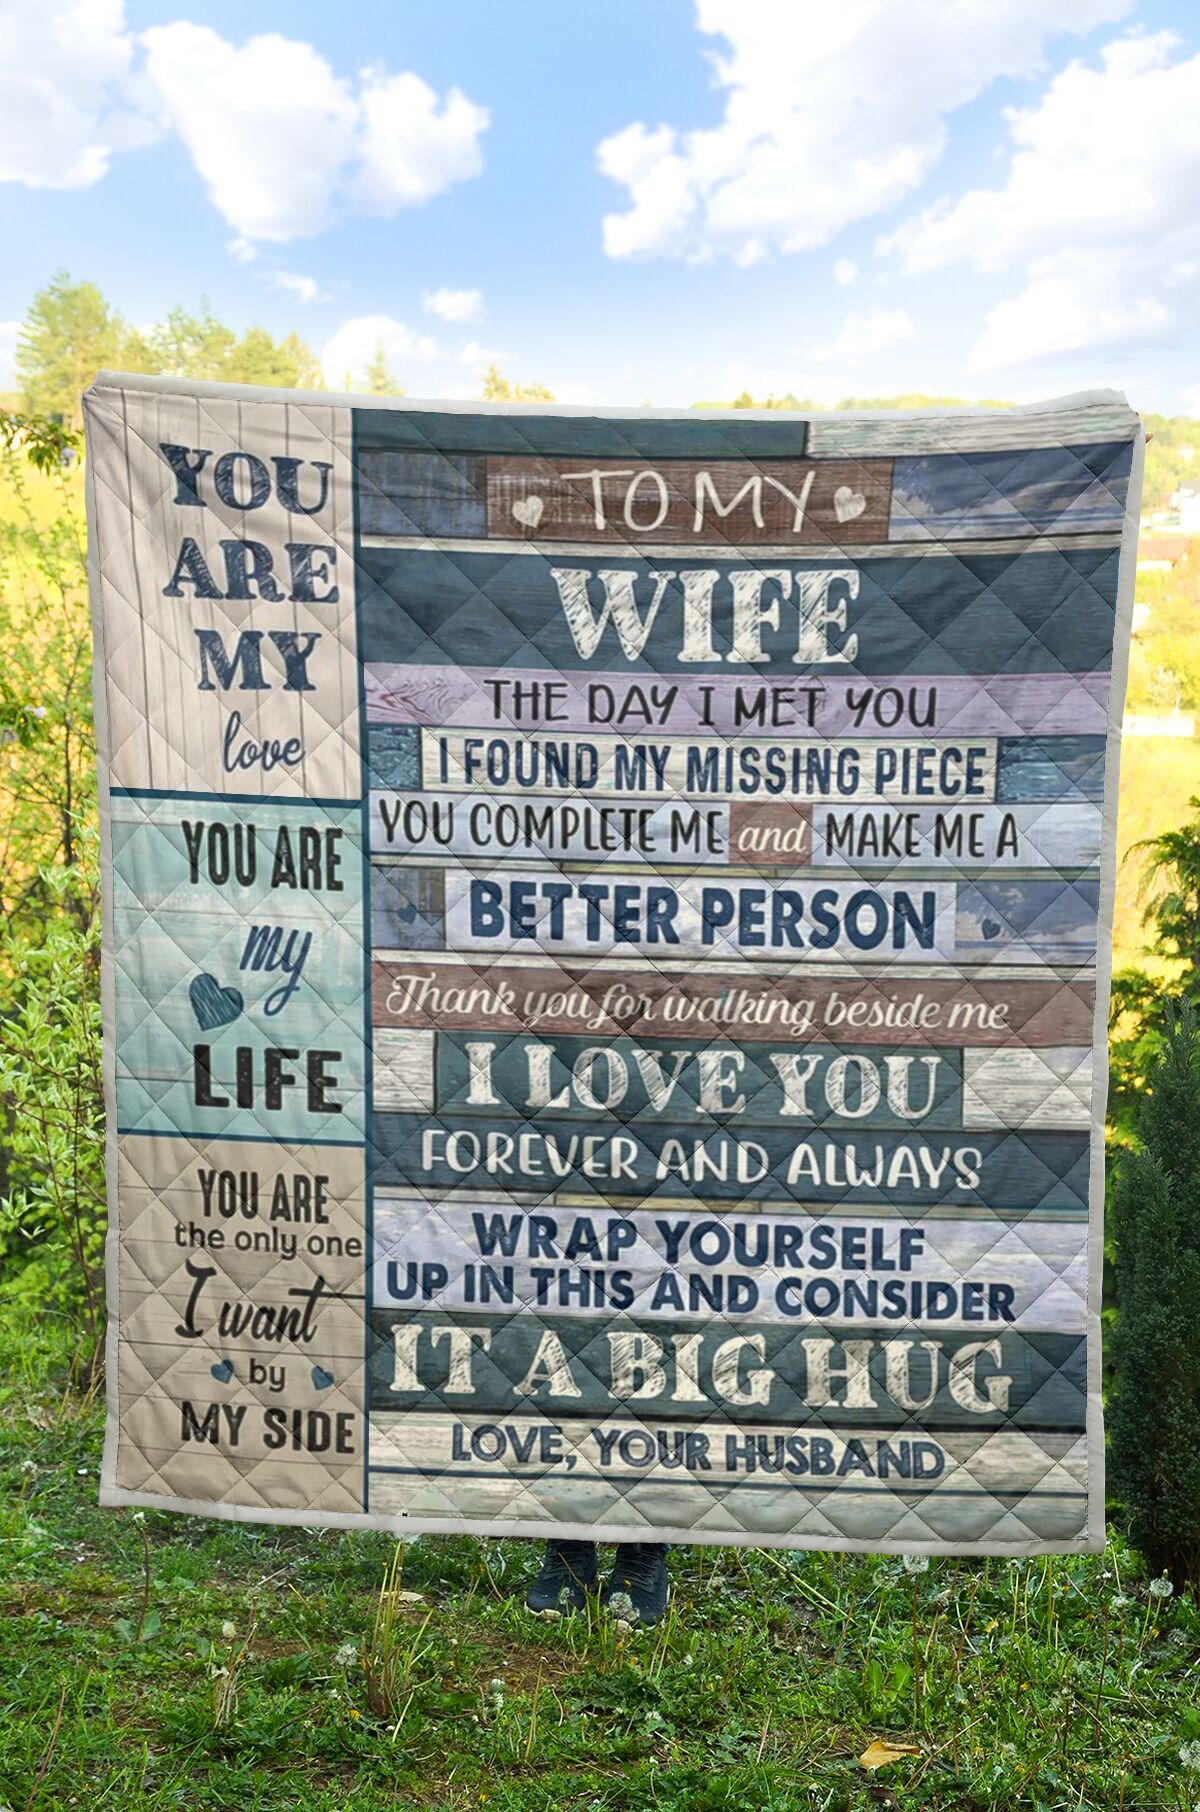 To my wife the day I met you QUILT3